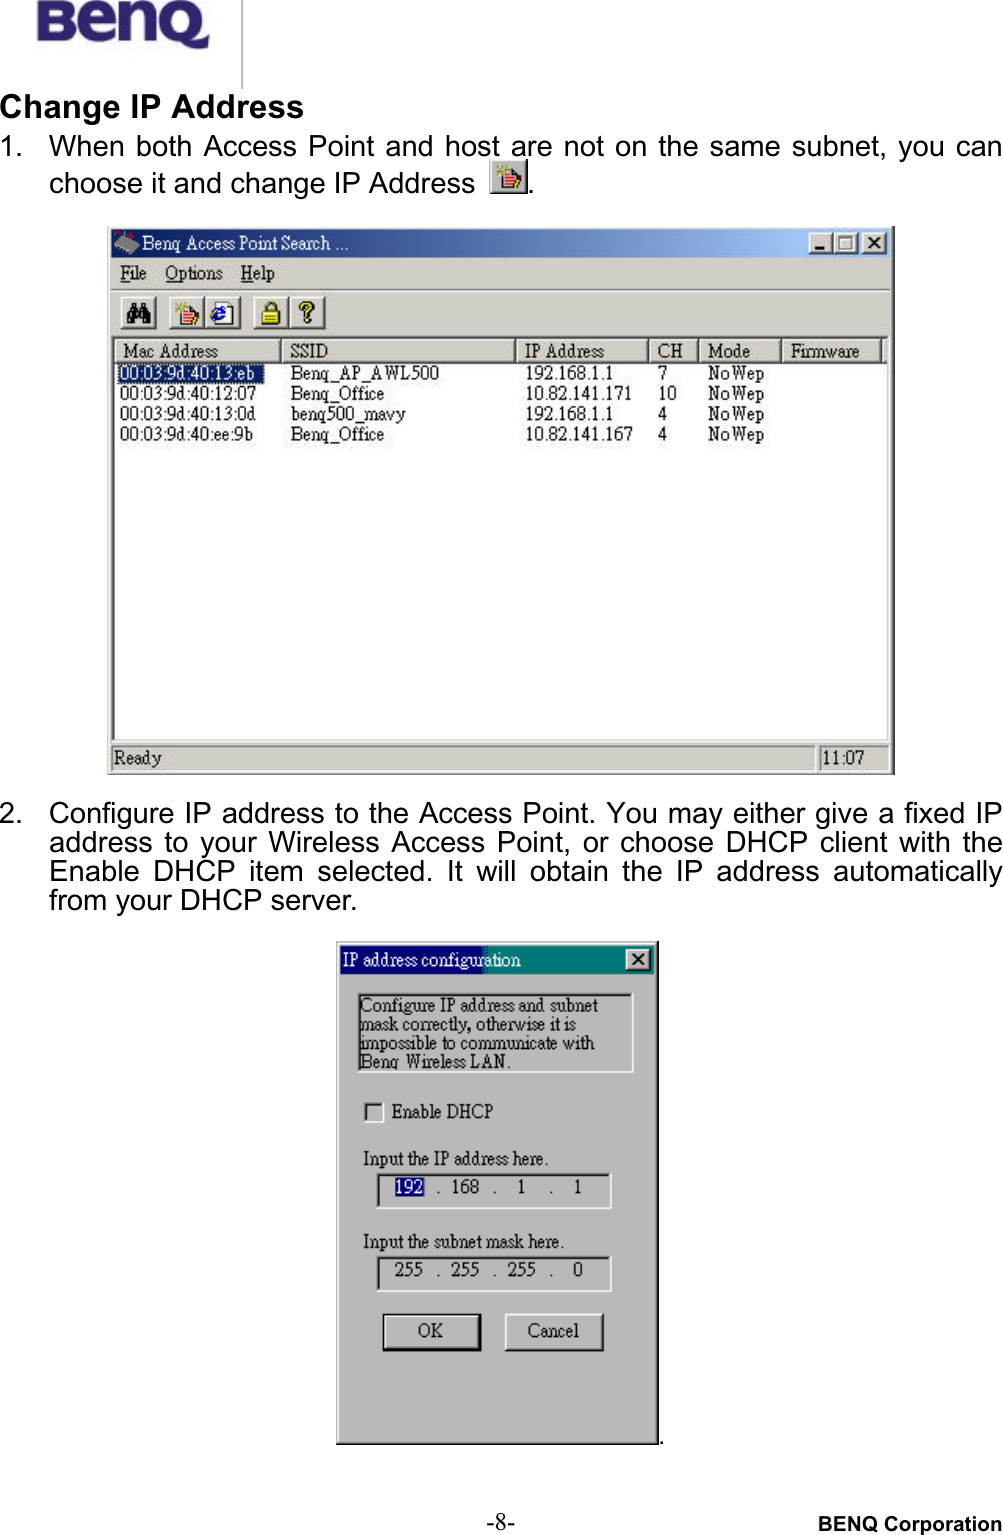 BENQ Corporation-8-Change IP Address1. When both Access Point and host are not on the same subnet, you canchoose it and change IP Address  .2. Configure IP address to the Access Point. You may either give a fixed IPaddress to  your  Wireless  Access  Point,  or  choose DHCP  client  with  theEnable DHCP  item  selected. It  will obtain  the  IP  address  automaticallyfrom your DHCP server..